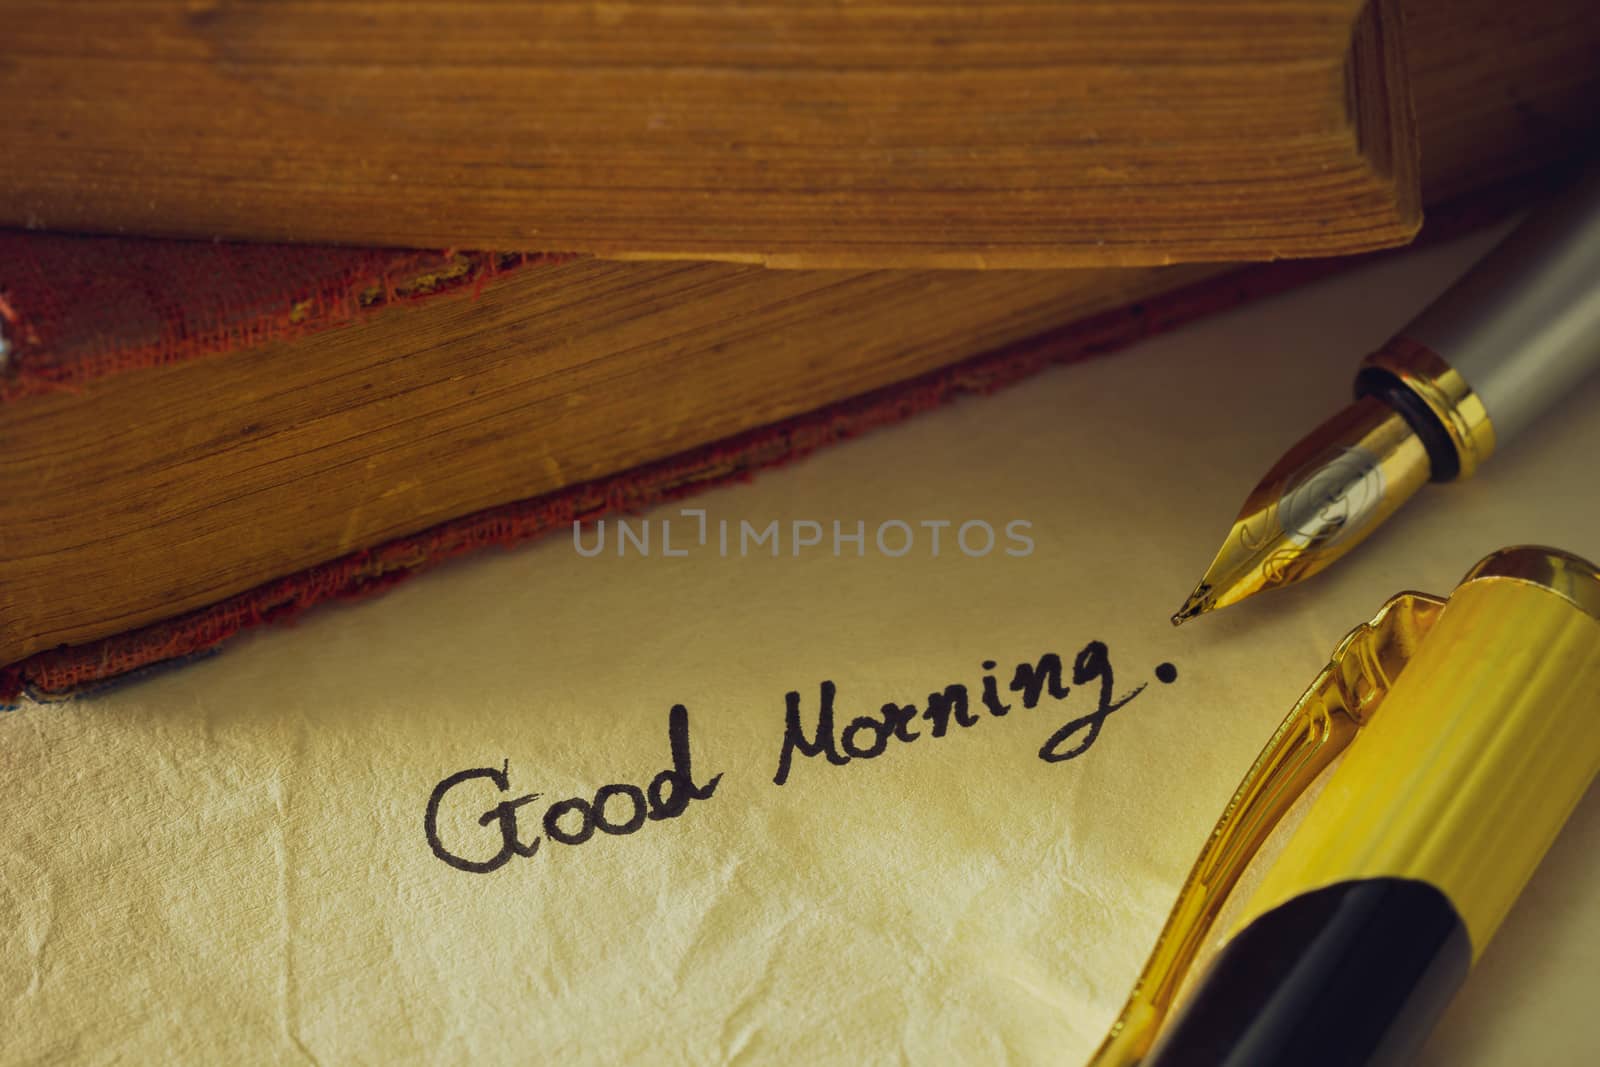 Vintage brass pen writing " Good morning " on old paper and old book stacked on wooden table.